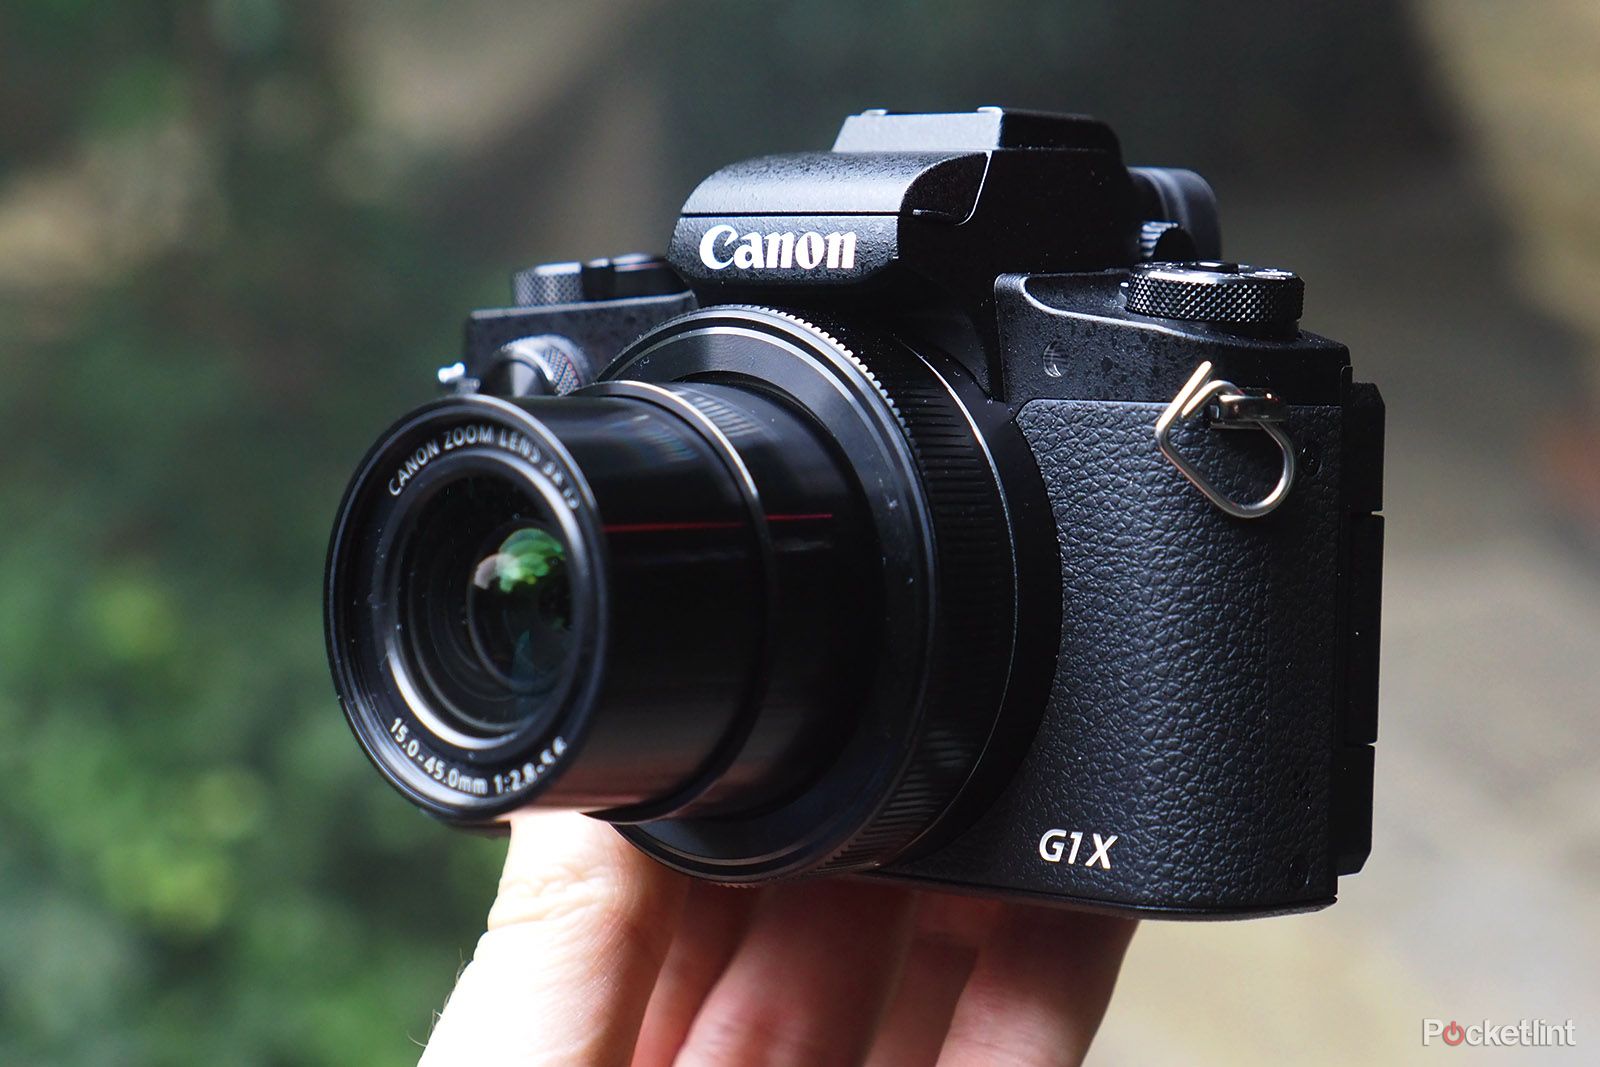 Canon PowerShot G1 X Mark III review: Can this compact truly 